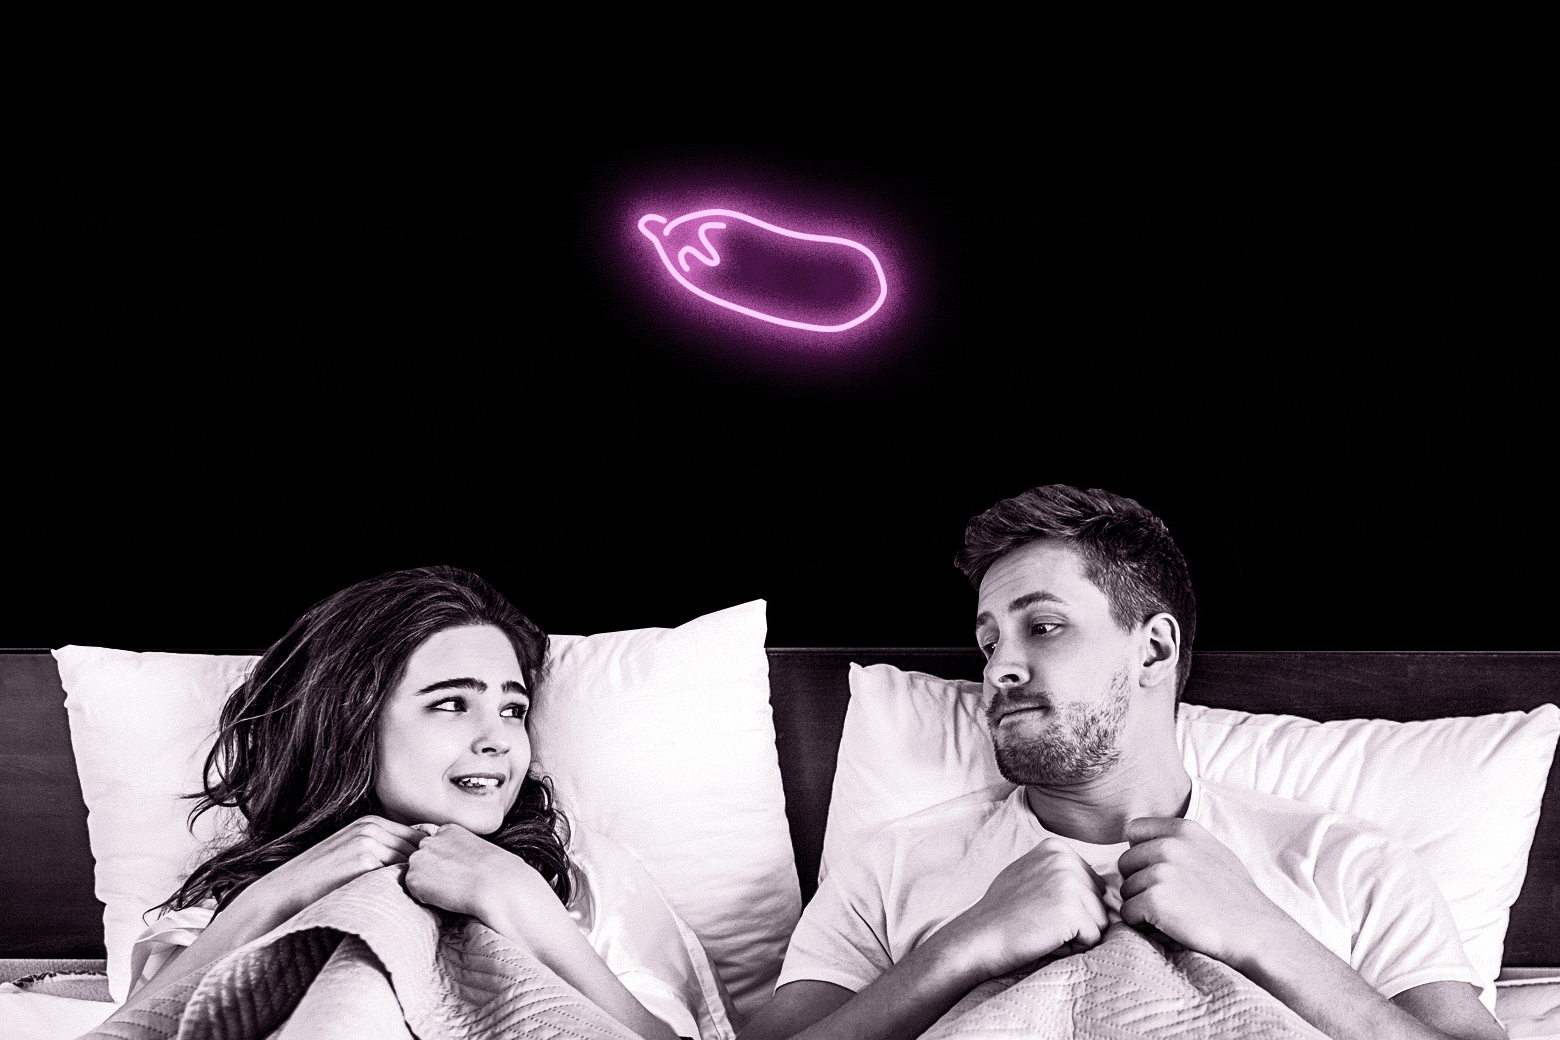 A man and woman looking timid in bed. A small neon eggplant hangs above them.